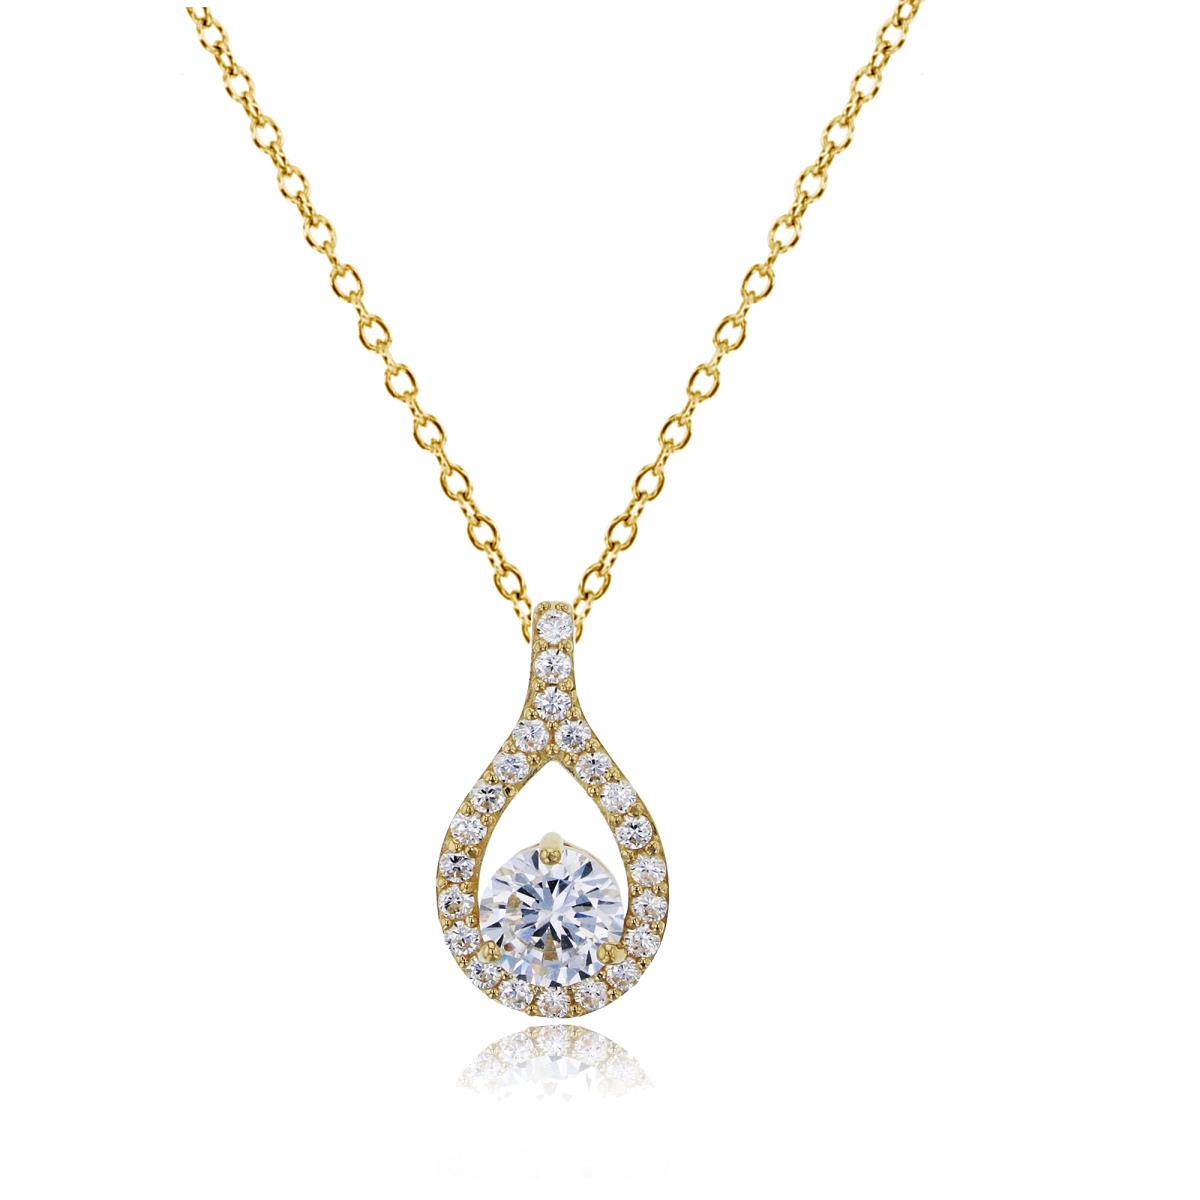 14K Yellow Gold 6mm Round Cut CZ Pear Shaped 18" Necklace